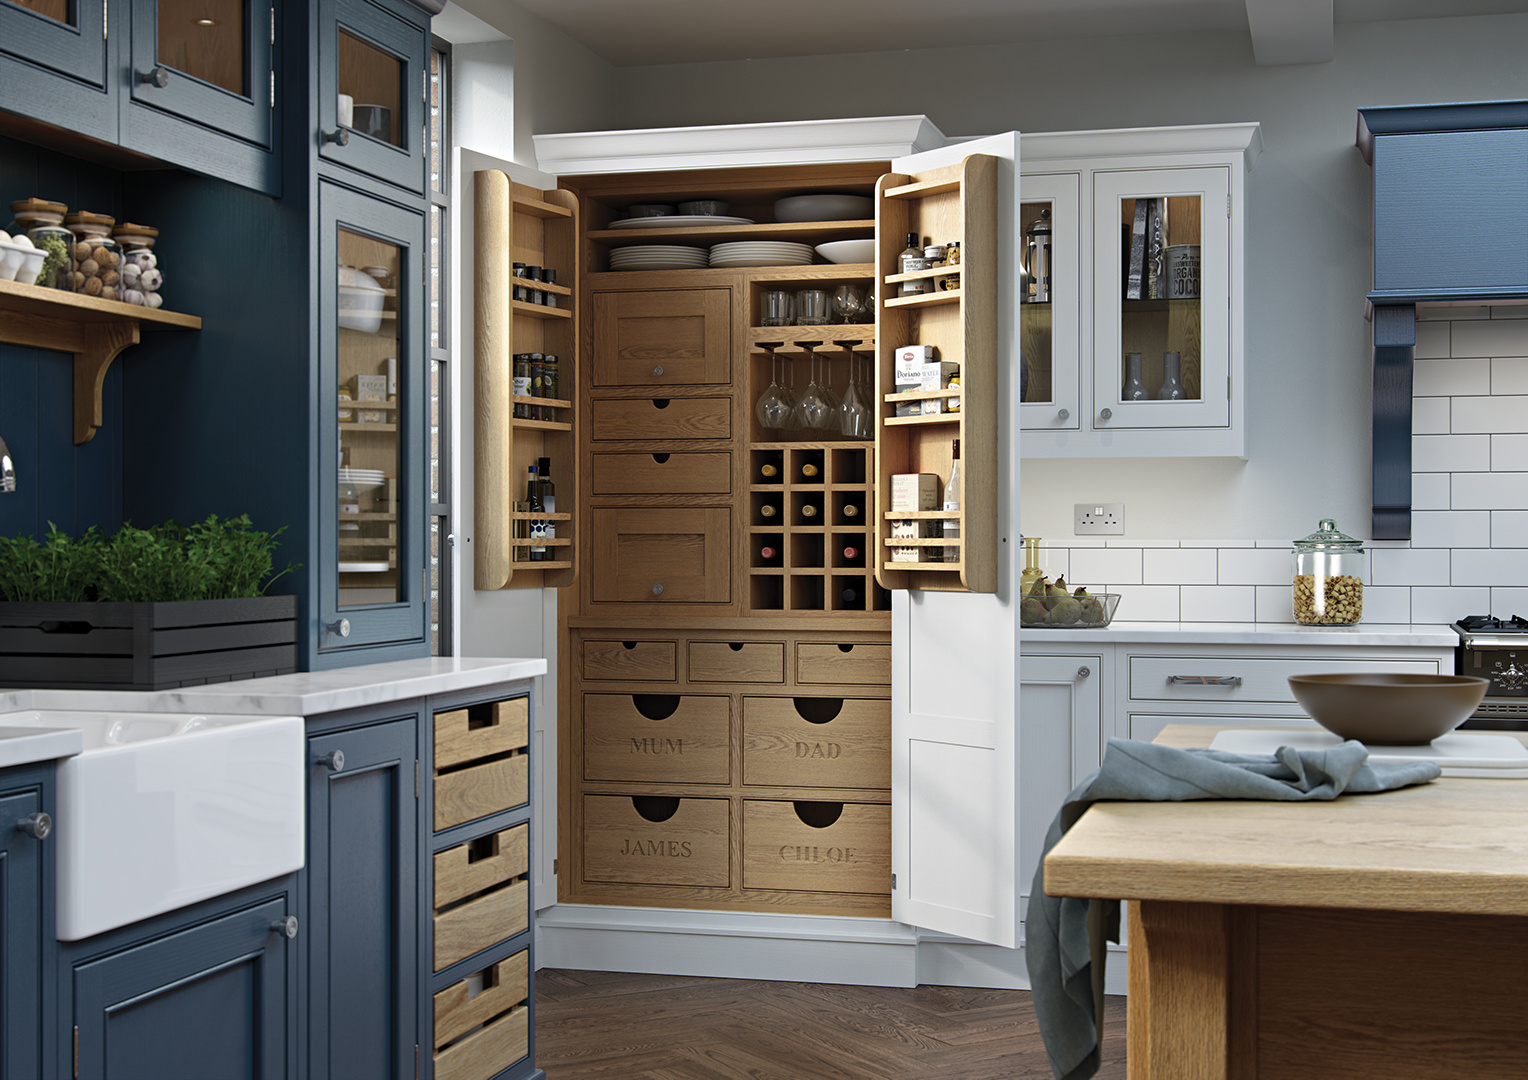 KIT-aisling-lawrence - Kitchens and Bedrooms exquisitely created by ...